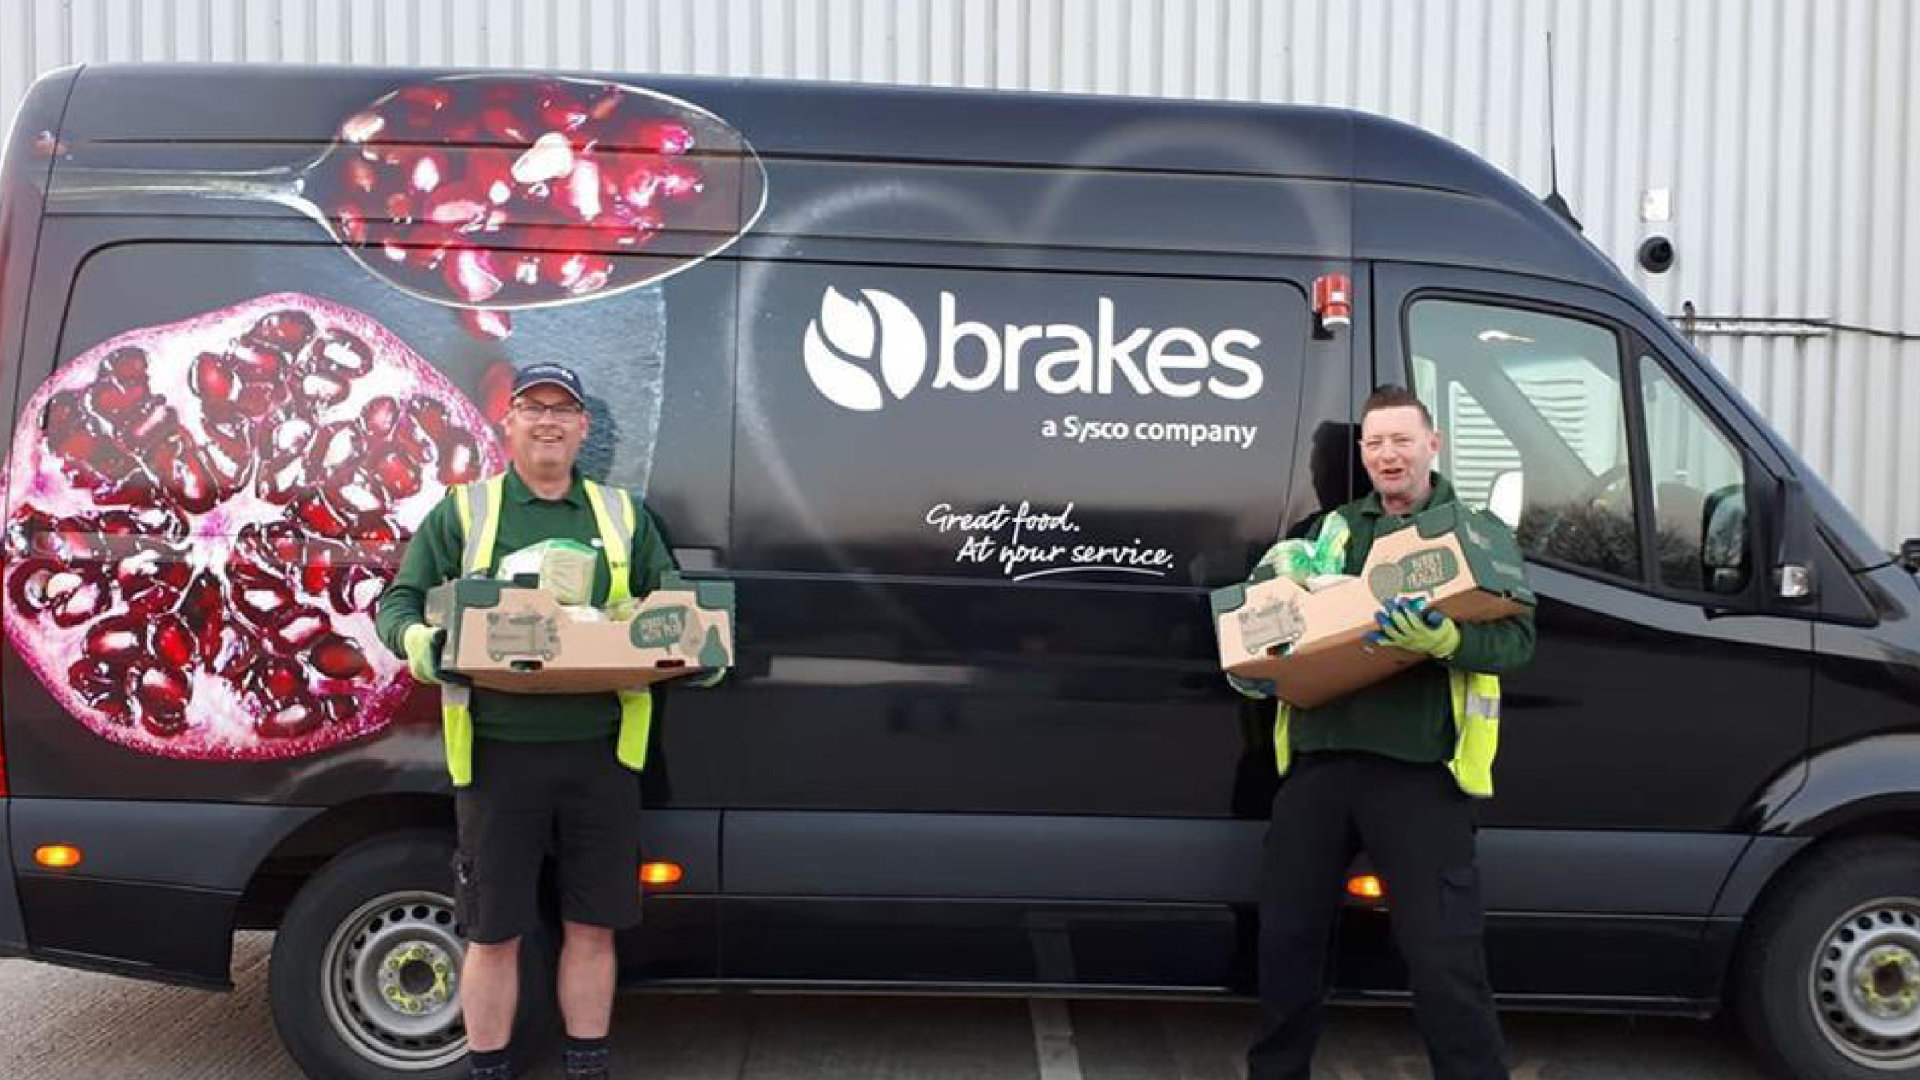 Brakes van and delivery drivers